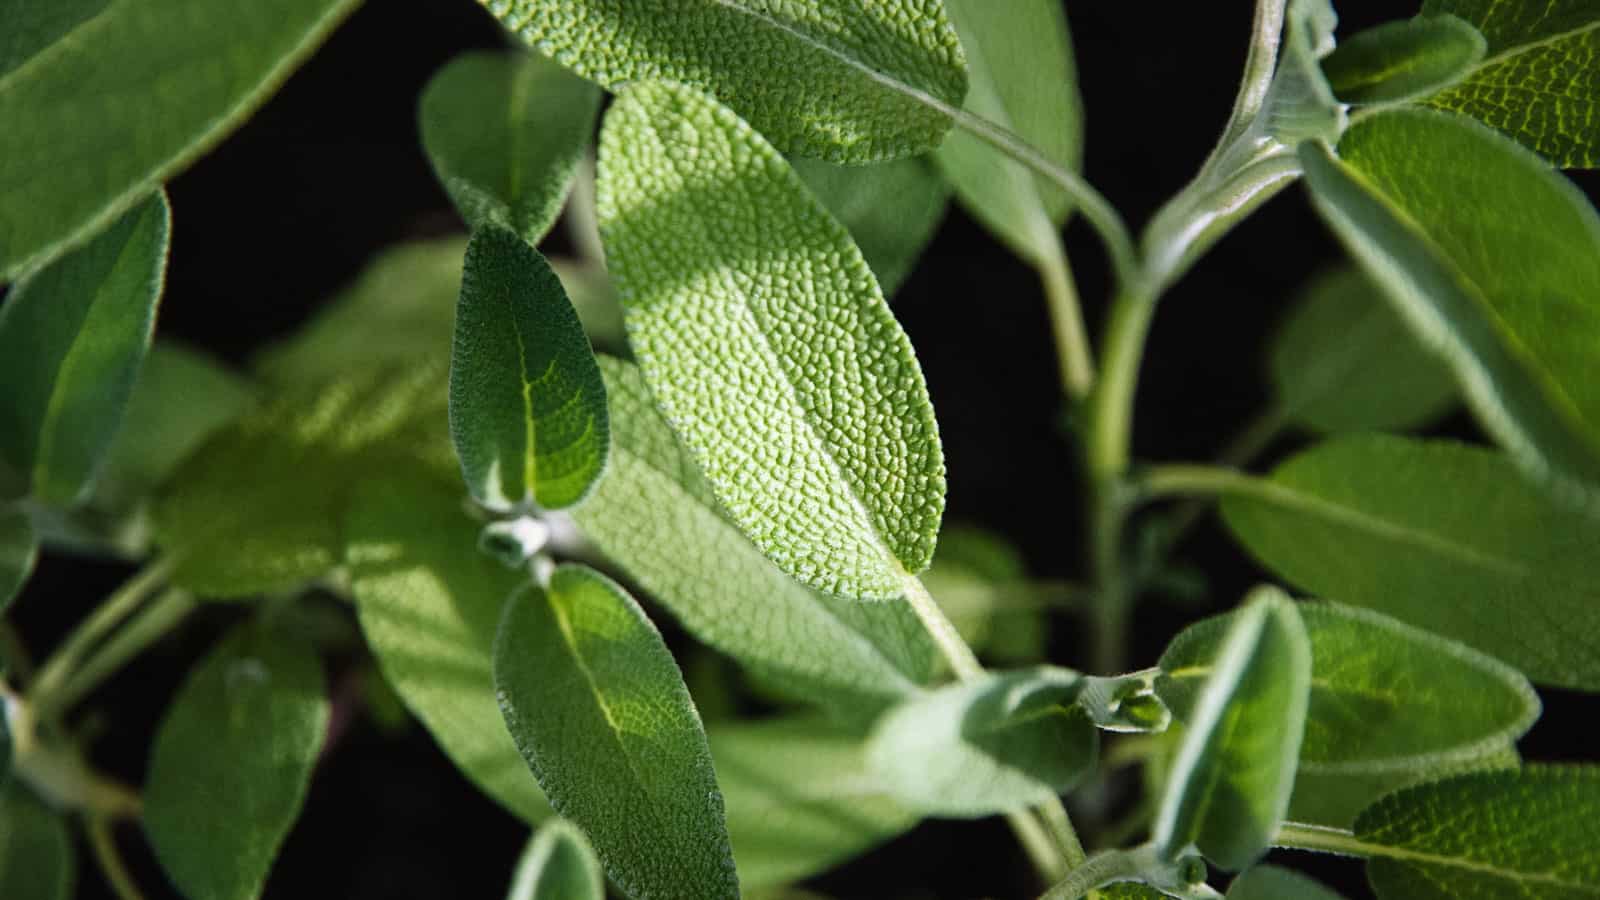 Up close photo of a sage plant